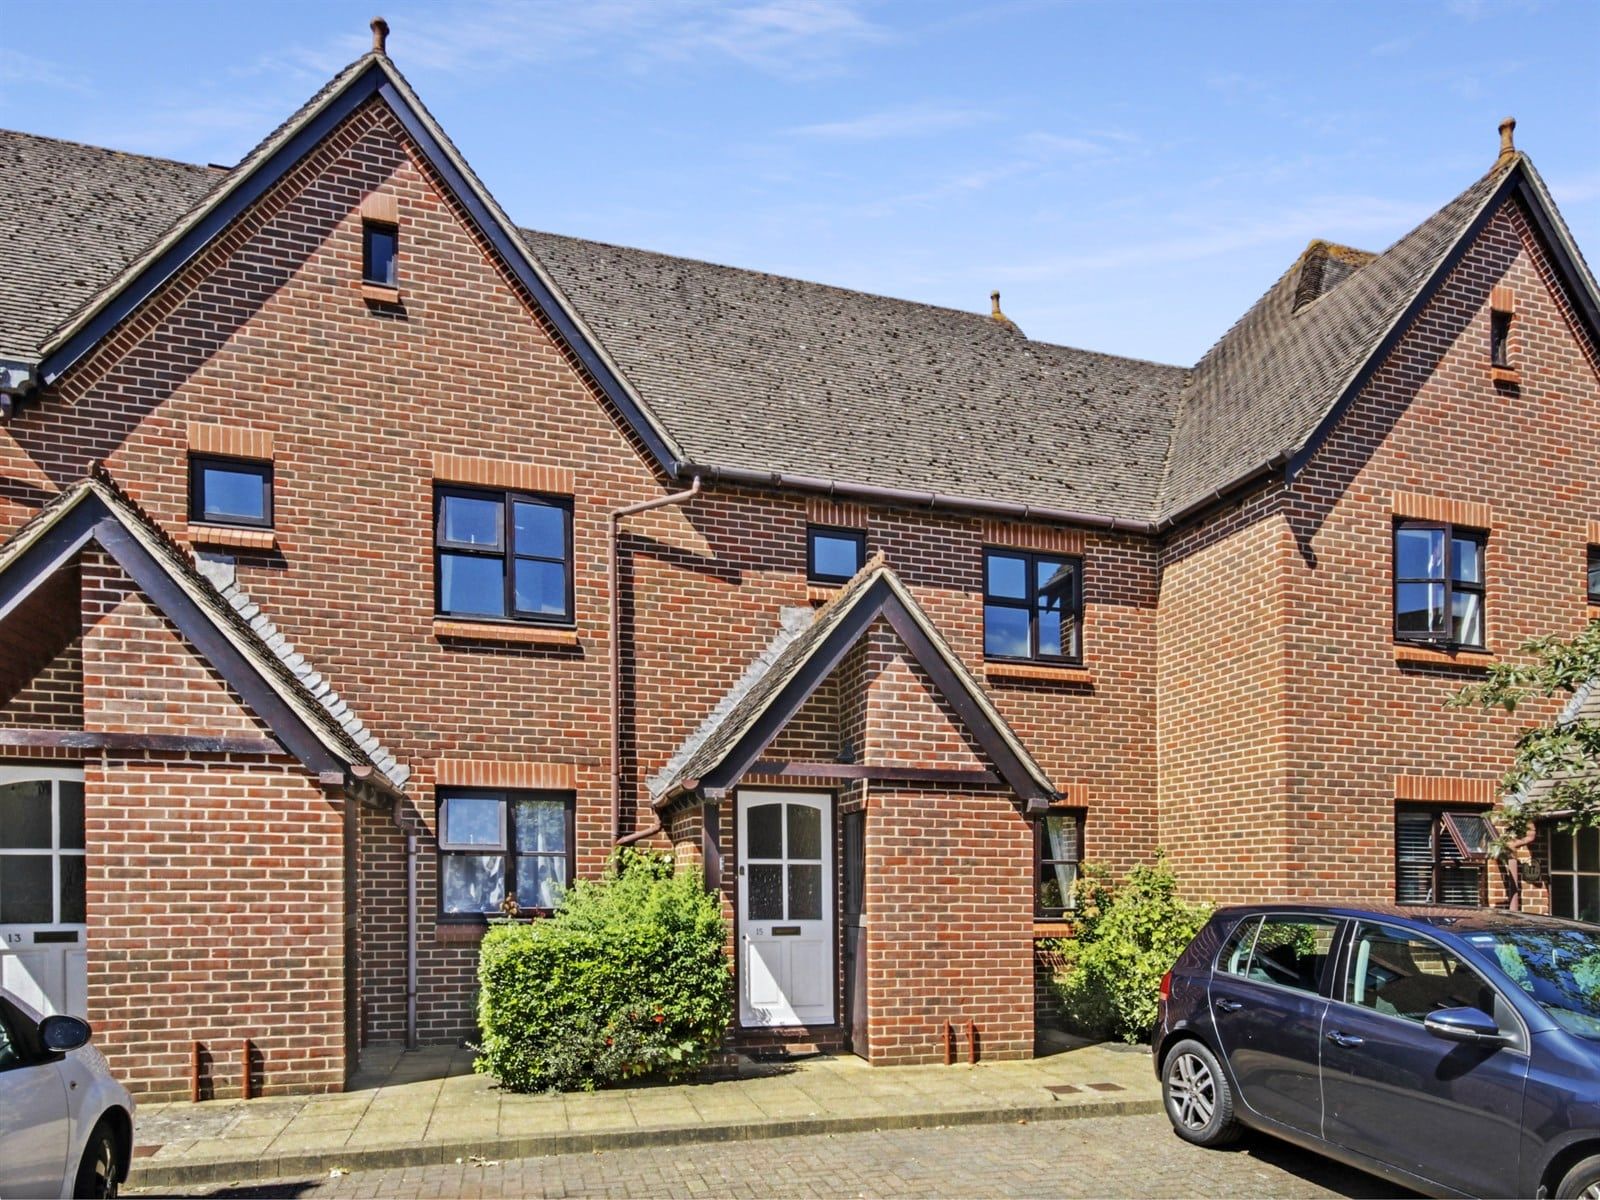 Fishbourne Road East, Chichester, West Sussex, PO19 3HL